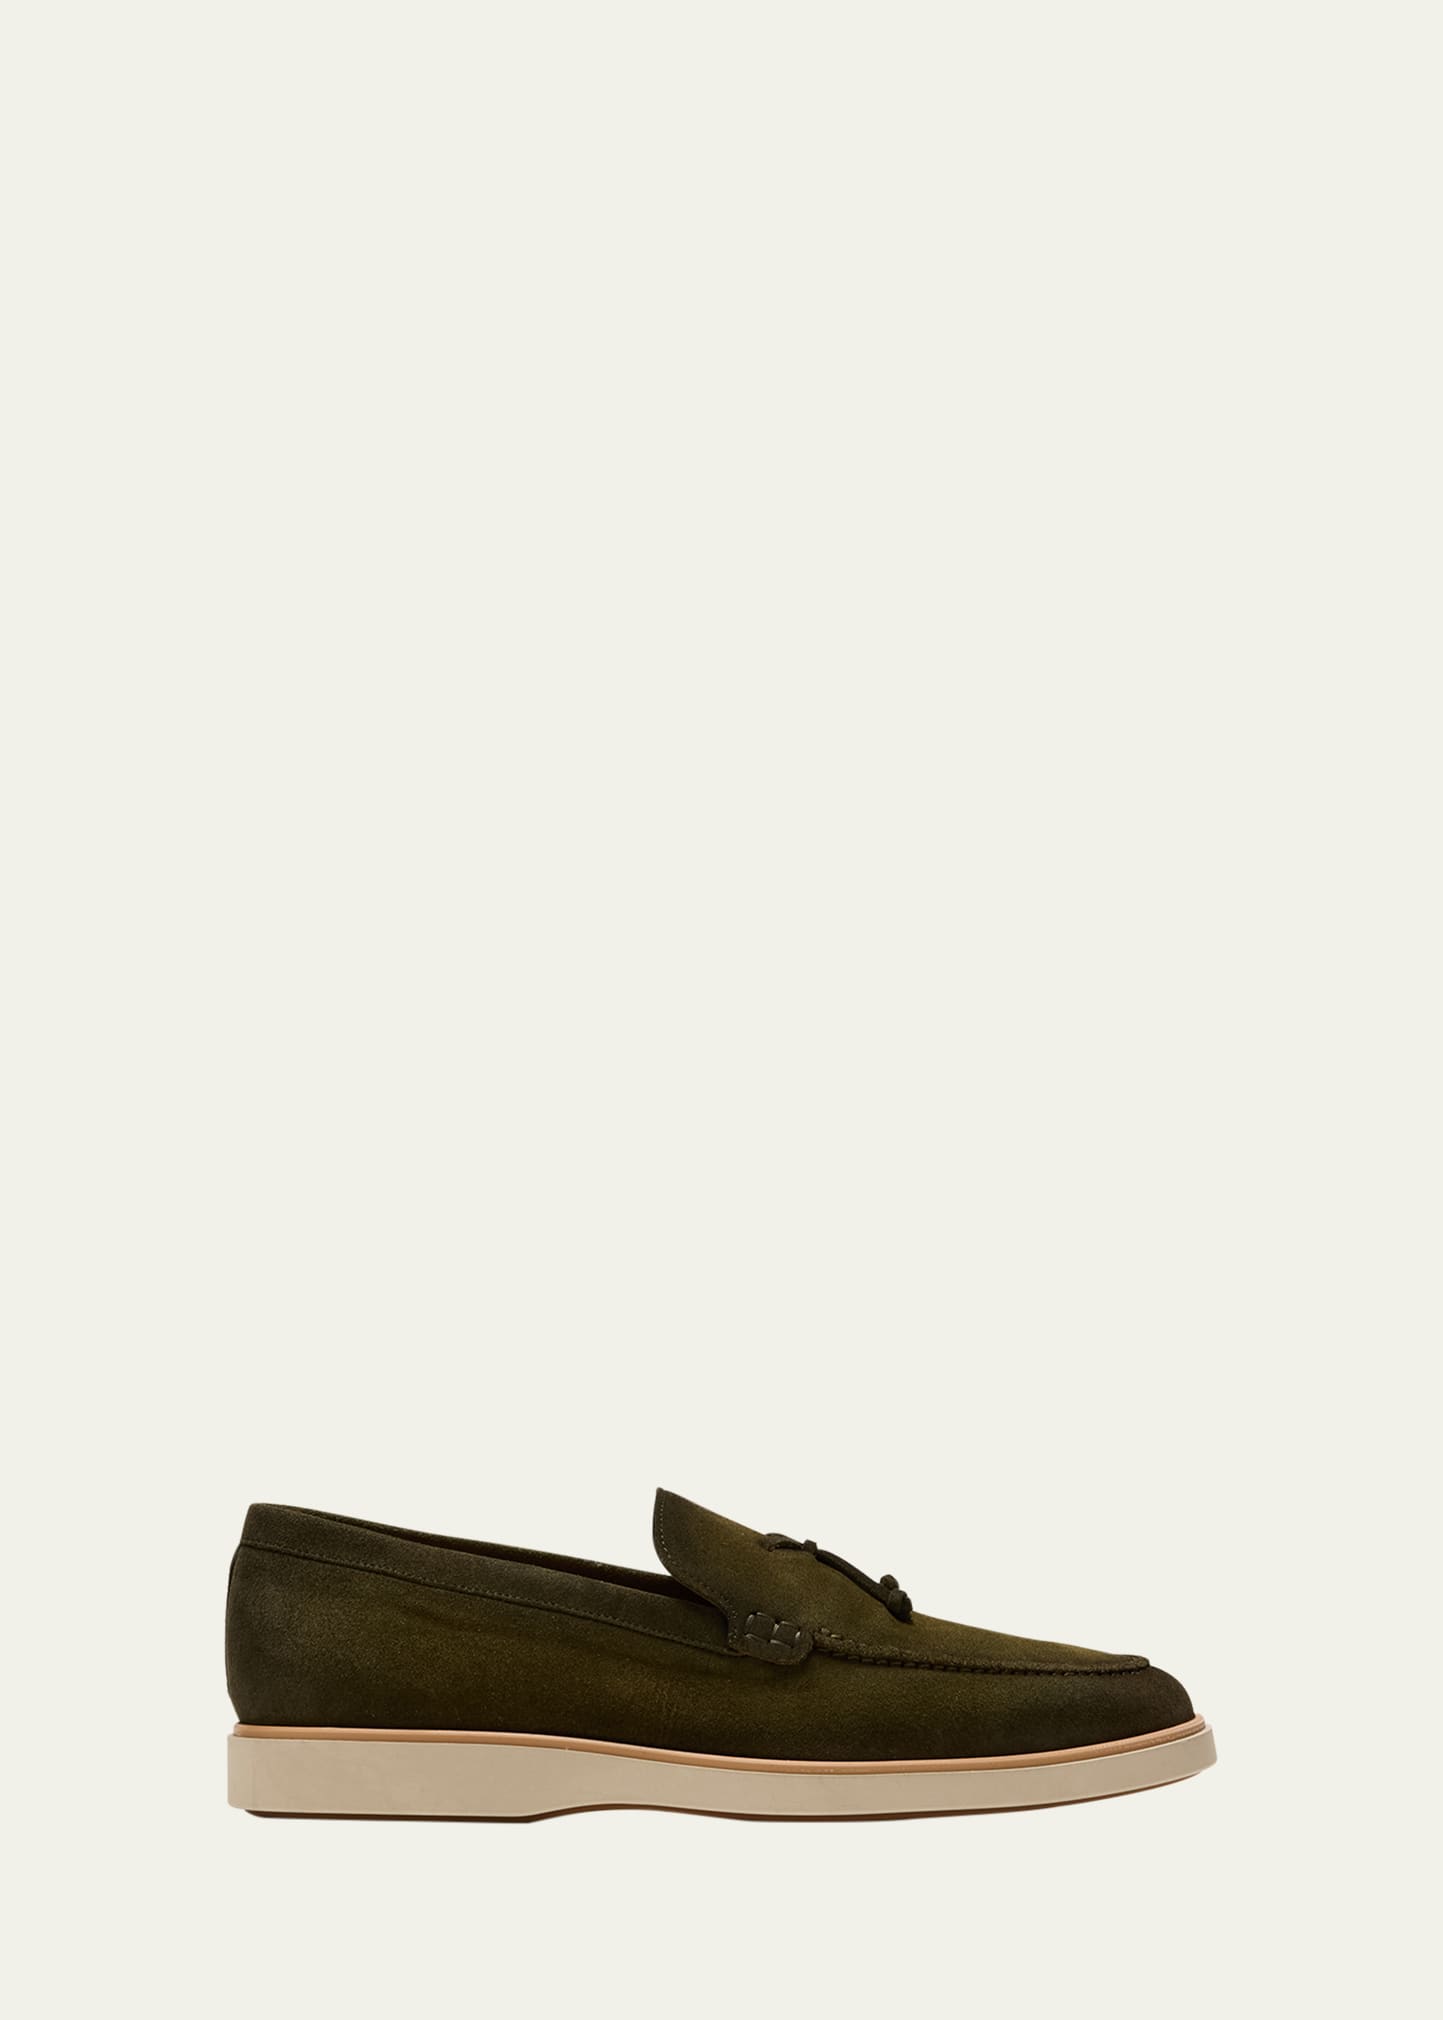 Shop Magnanni Men's Lourenco Knot Suede Boat Shoes In Hunter Green